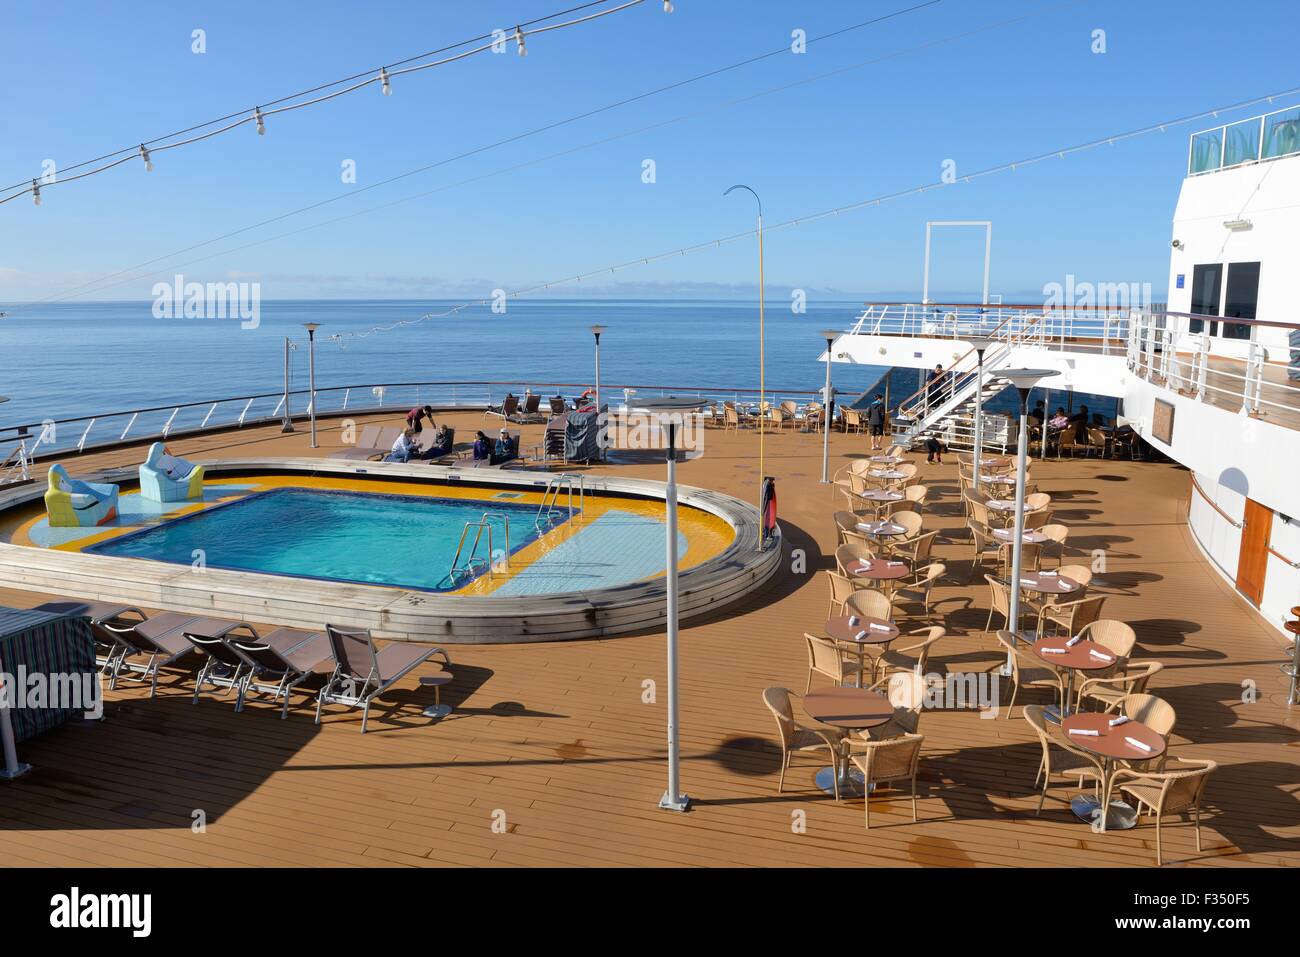 Swimming pool on the deck of the cruise ship Volendam Stock Photo - Alamy